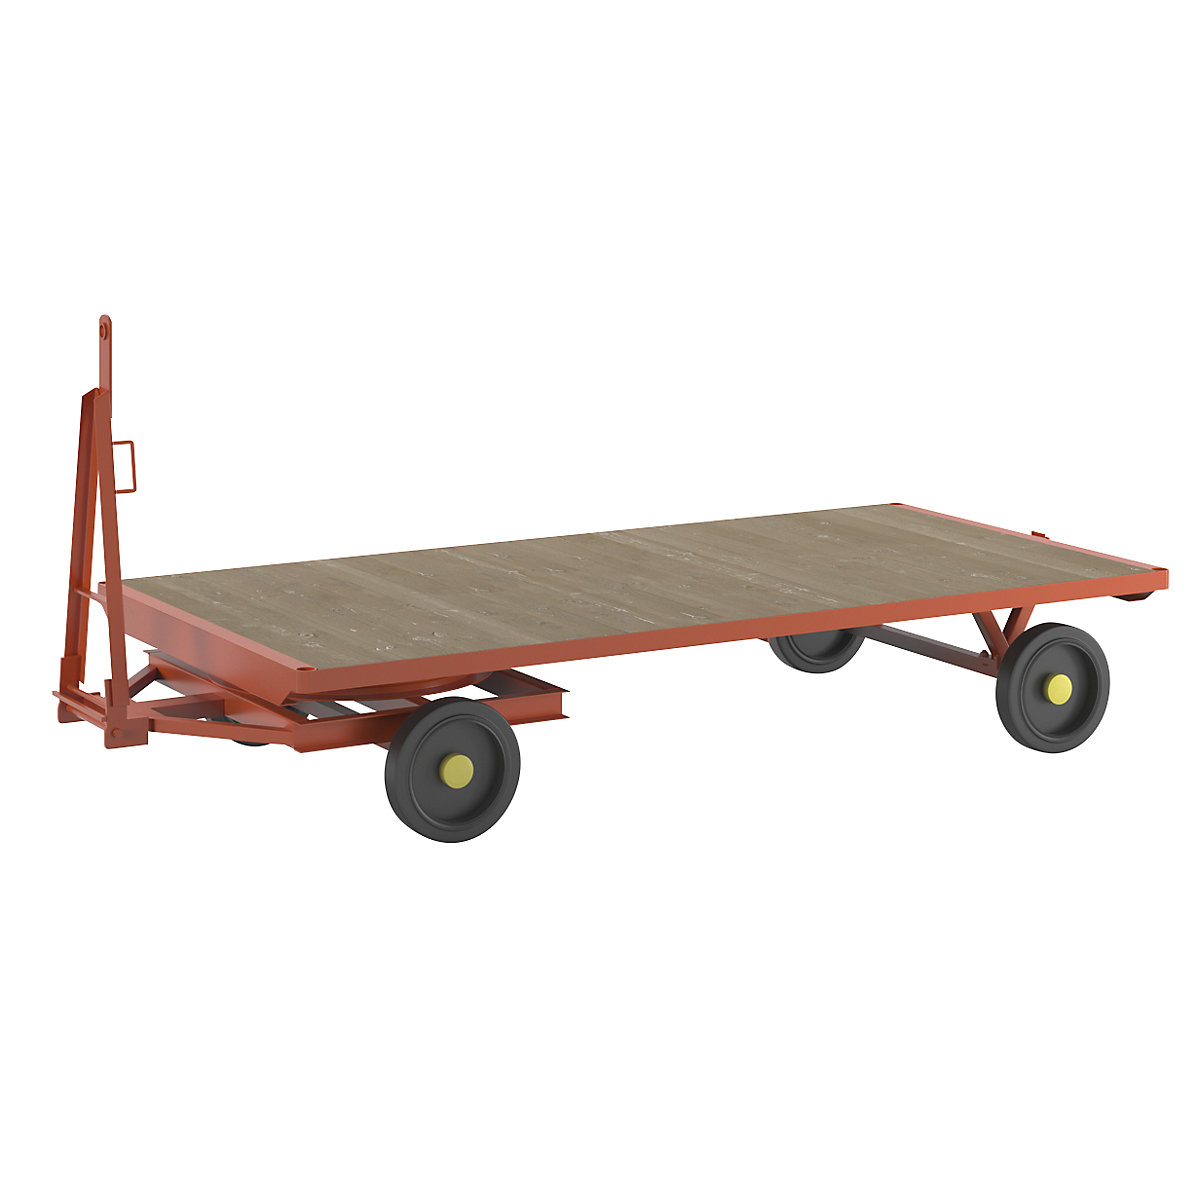 Trailer, 2-wheel turntable steering, max. load 3 t, platform 3.0 x 1.5 m, solid rubber tyres-12